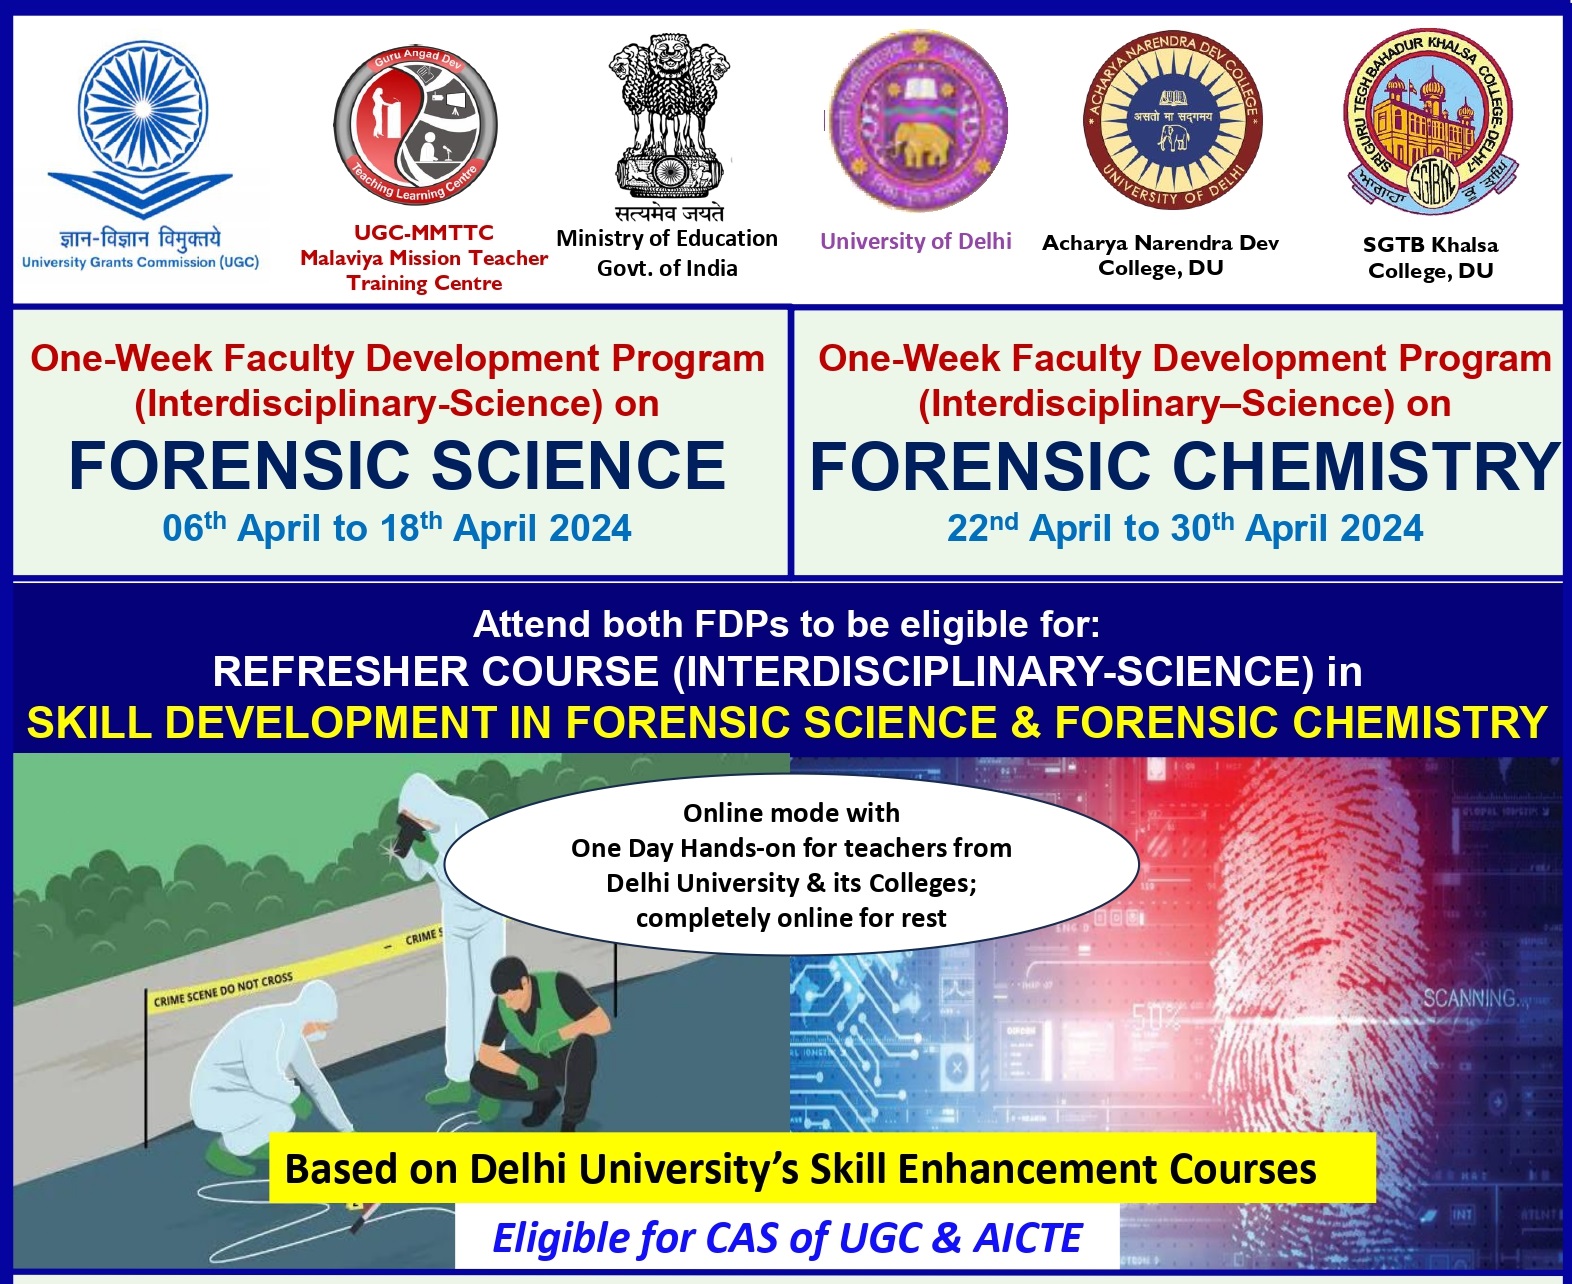 Course Image OFDP-FORENSIC SCIENCE (06 to 18 April 2024)